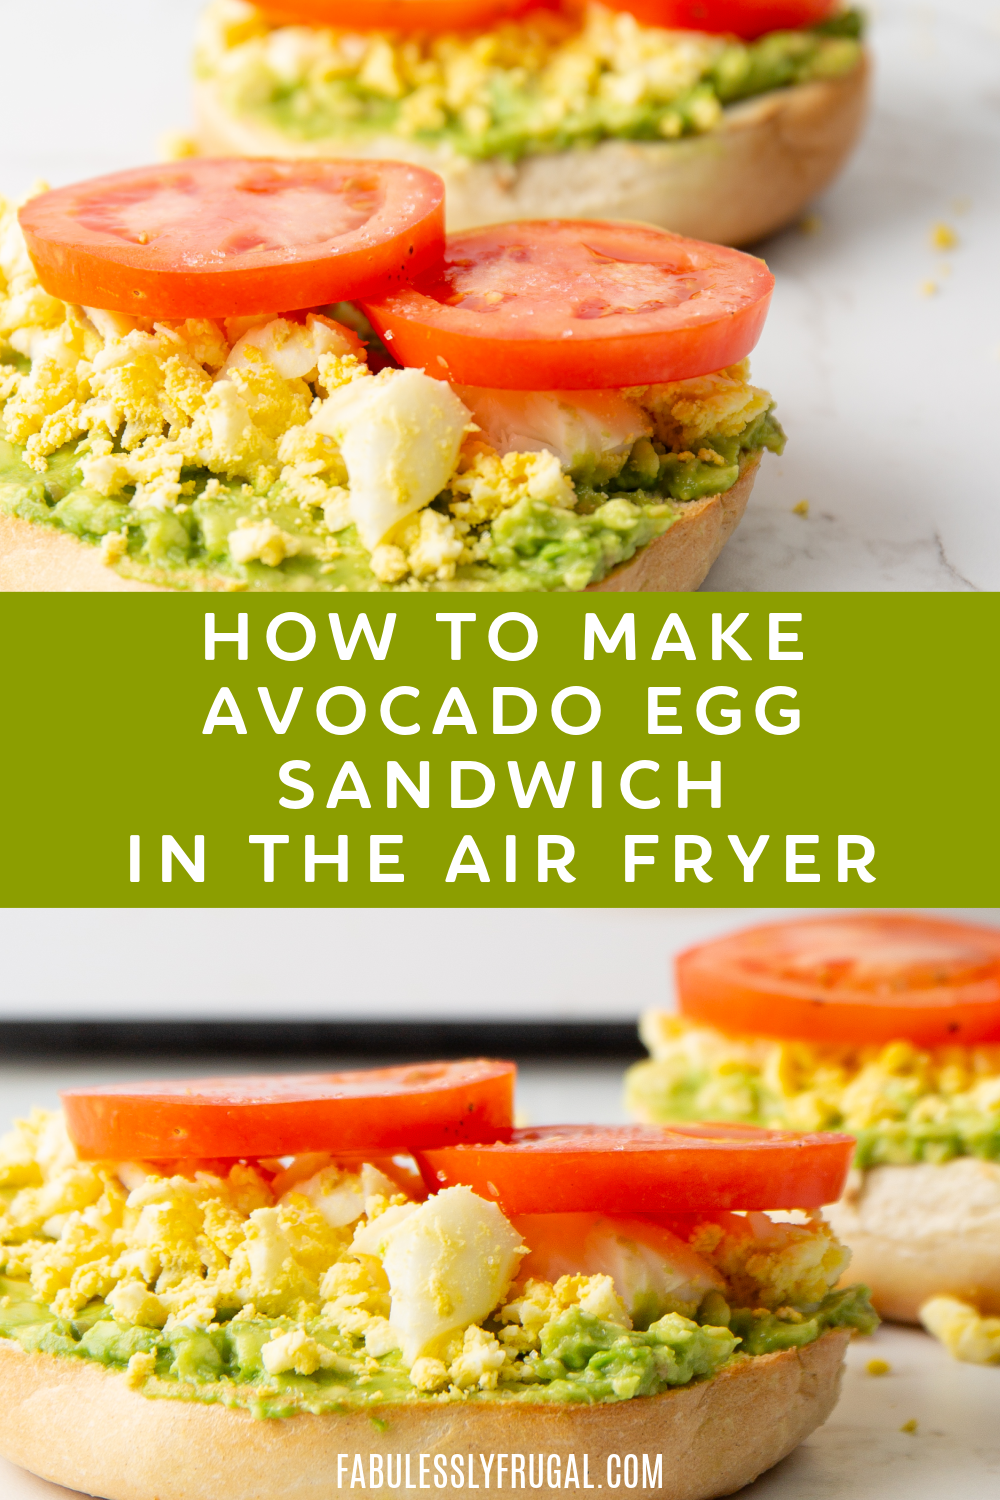 How to make avocado egg sandwich in the air fryer